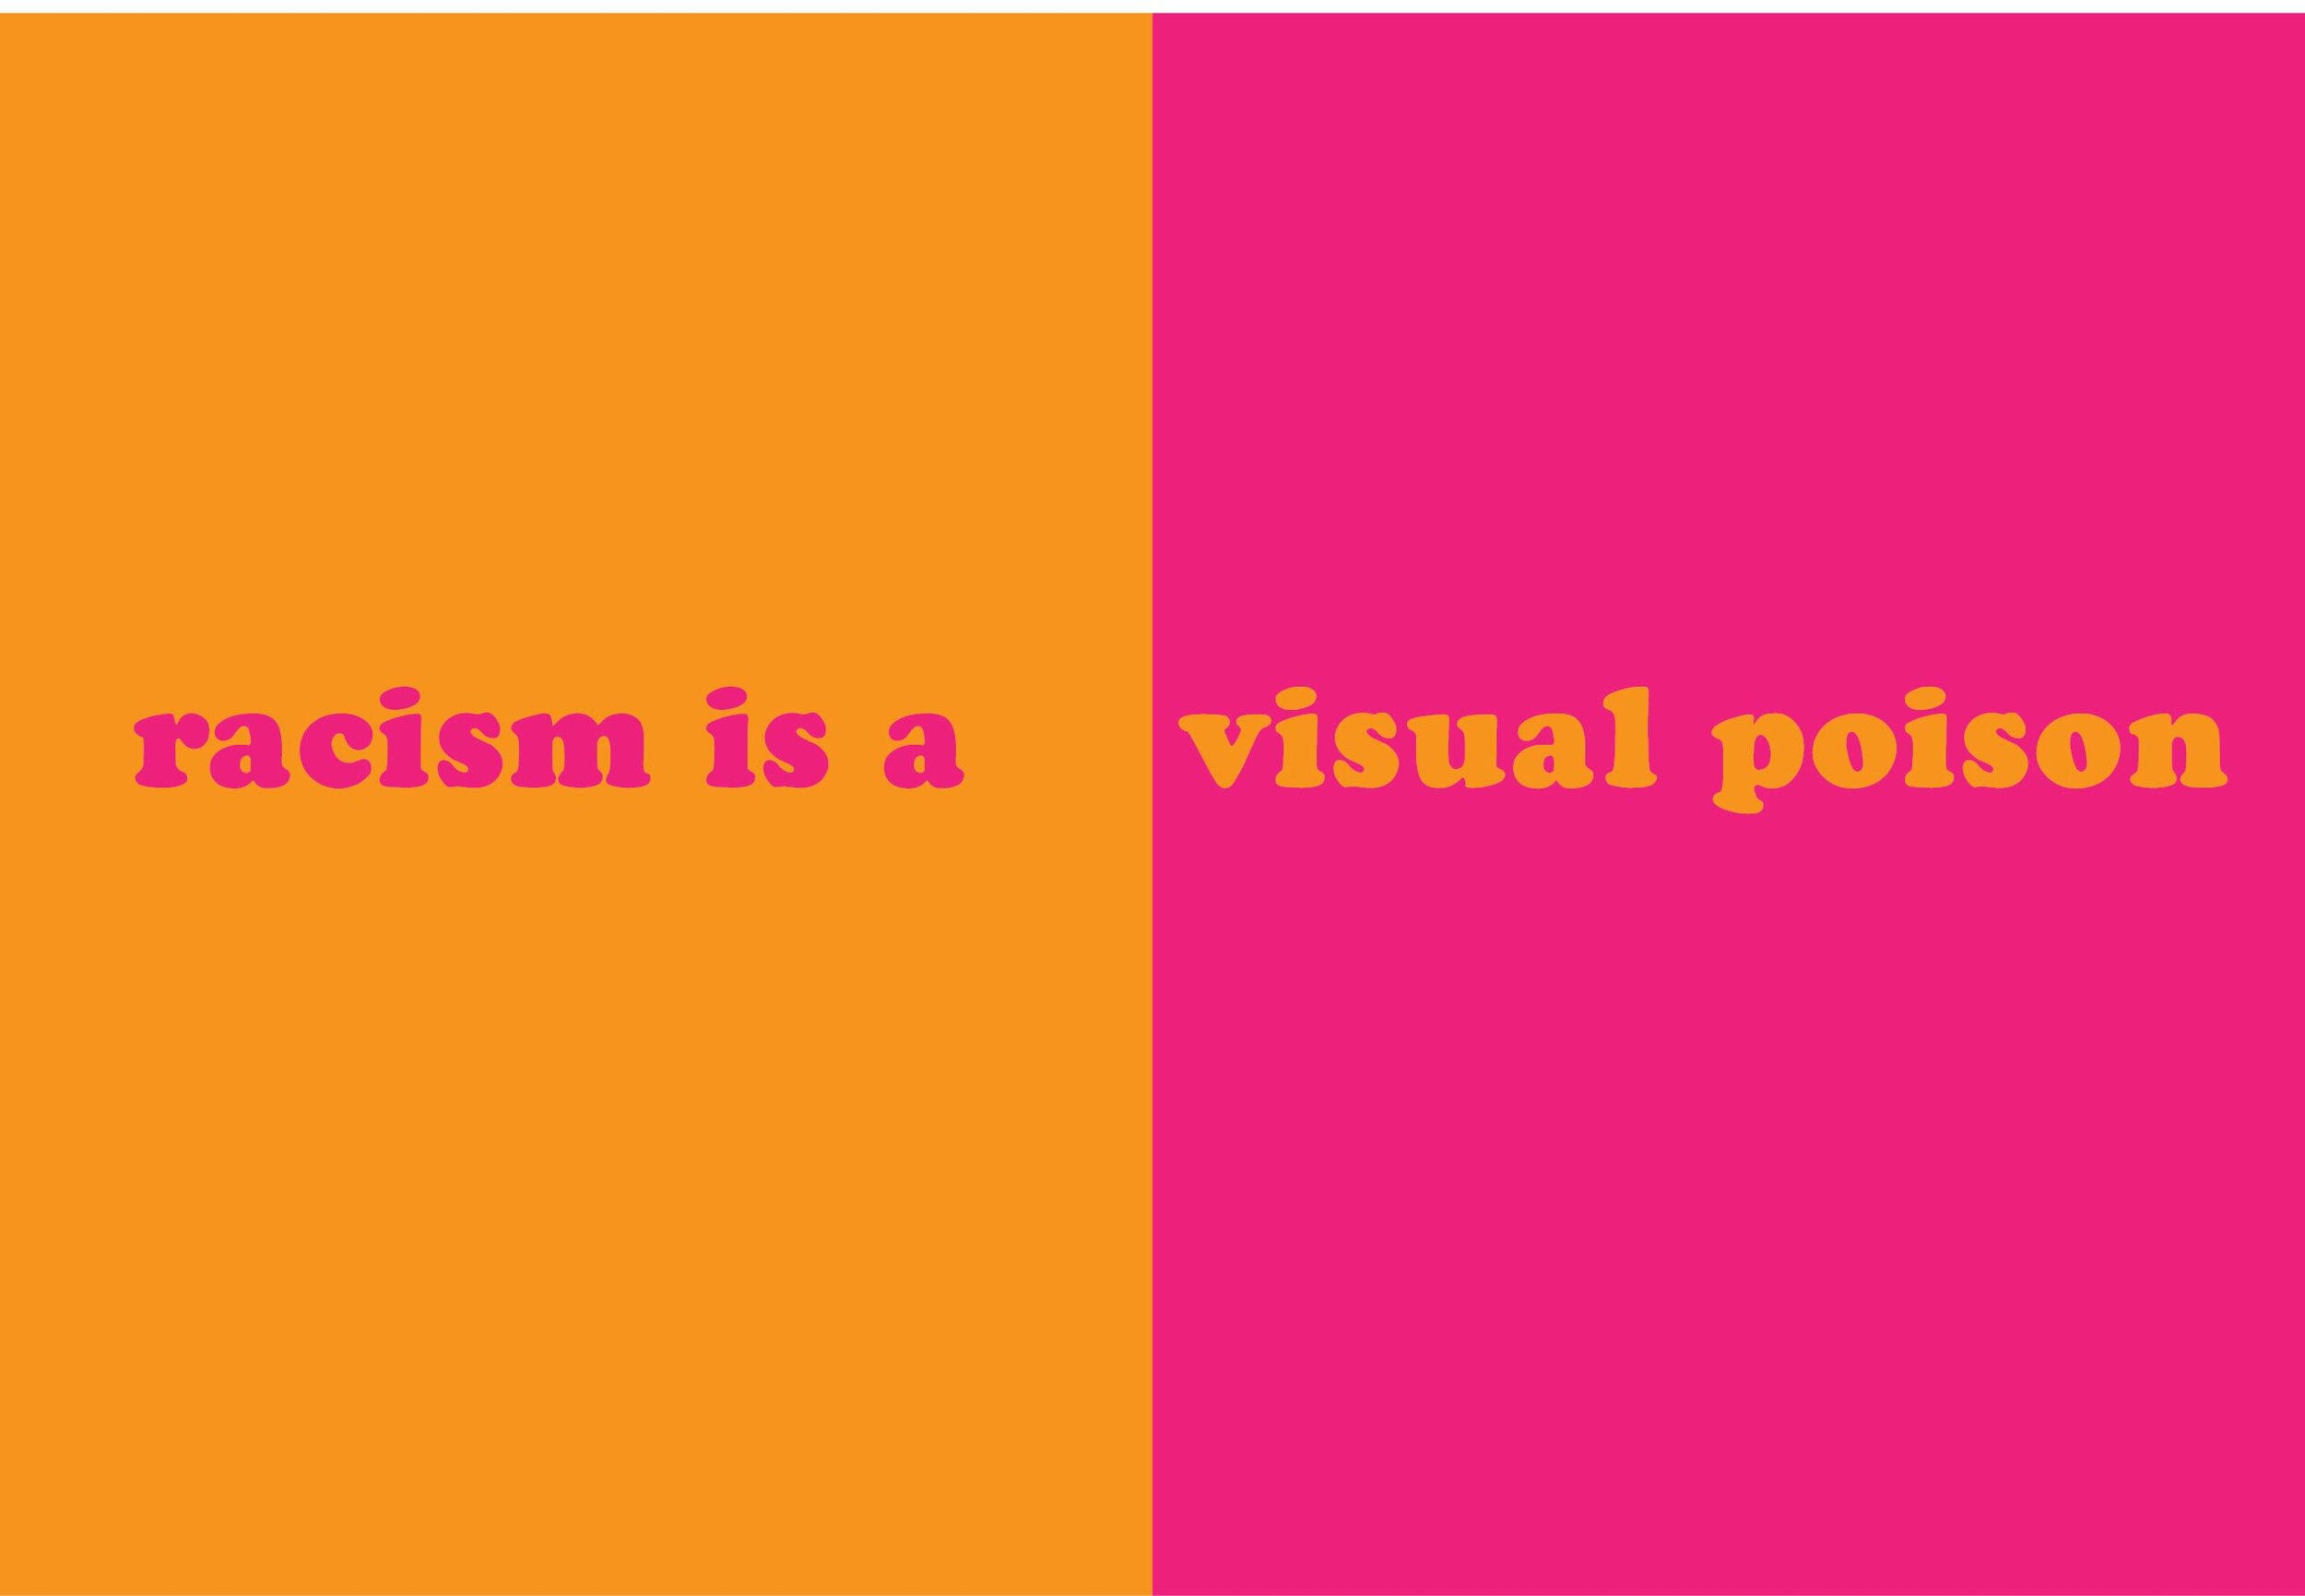 Racism is a Visual Poison (1 of 2)